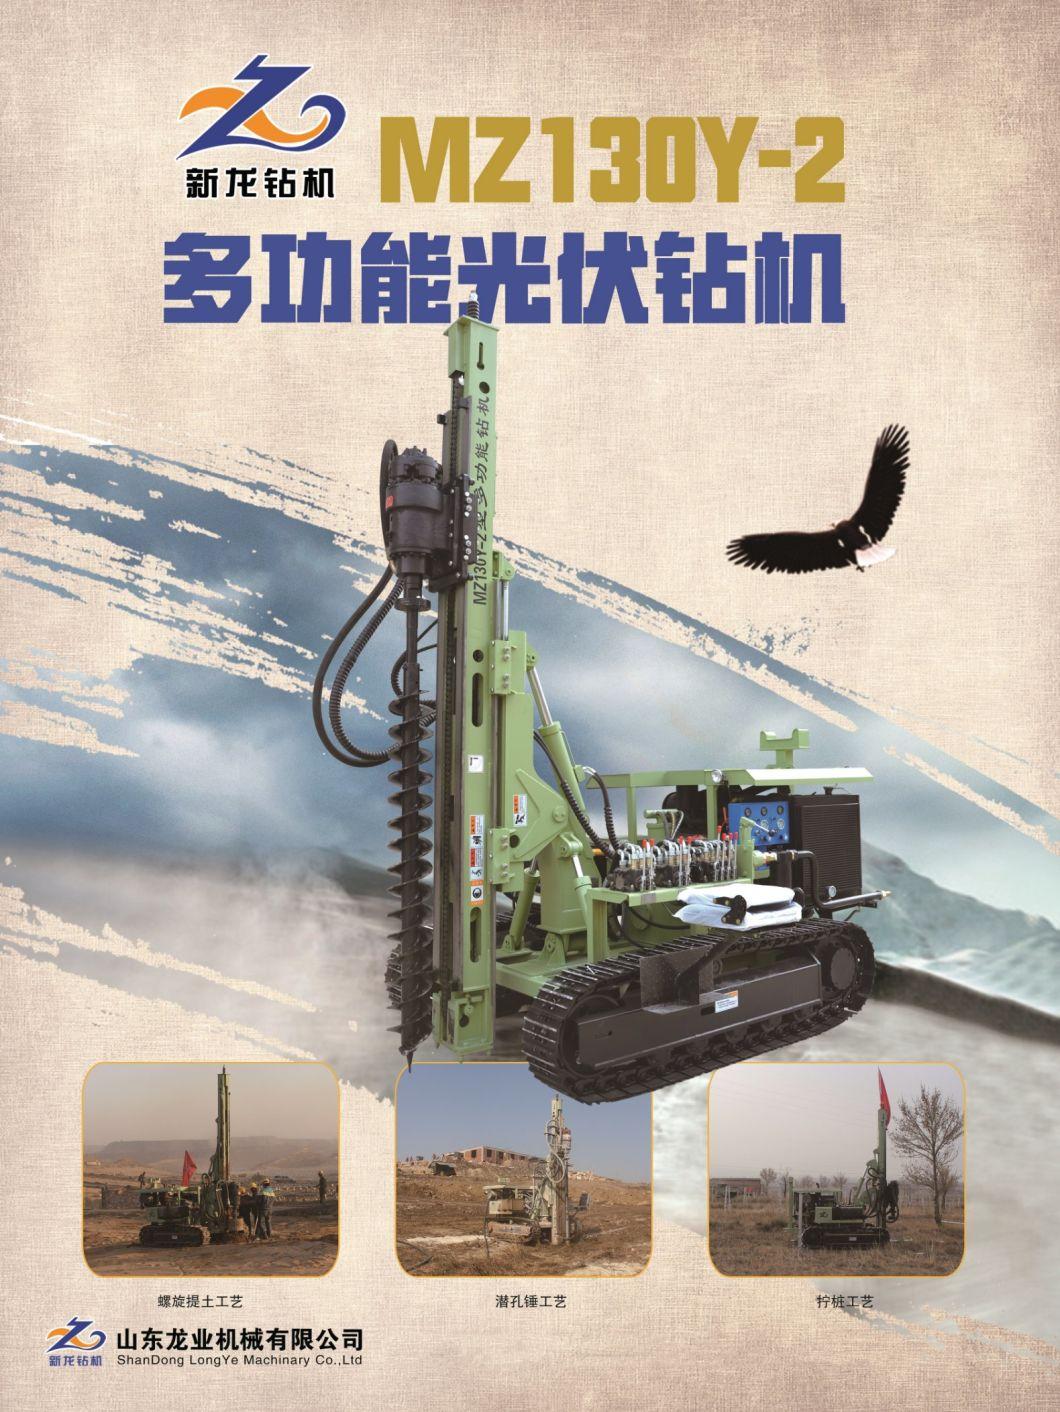 Photovoltaic Pile Driver Mz130y-2 Pile Drilling Machine